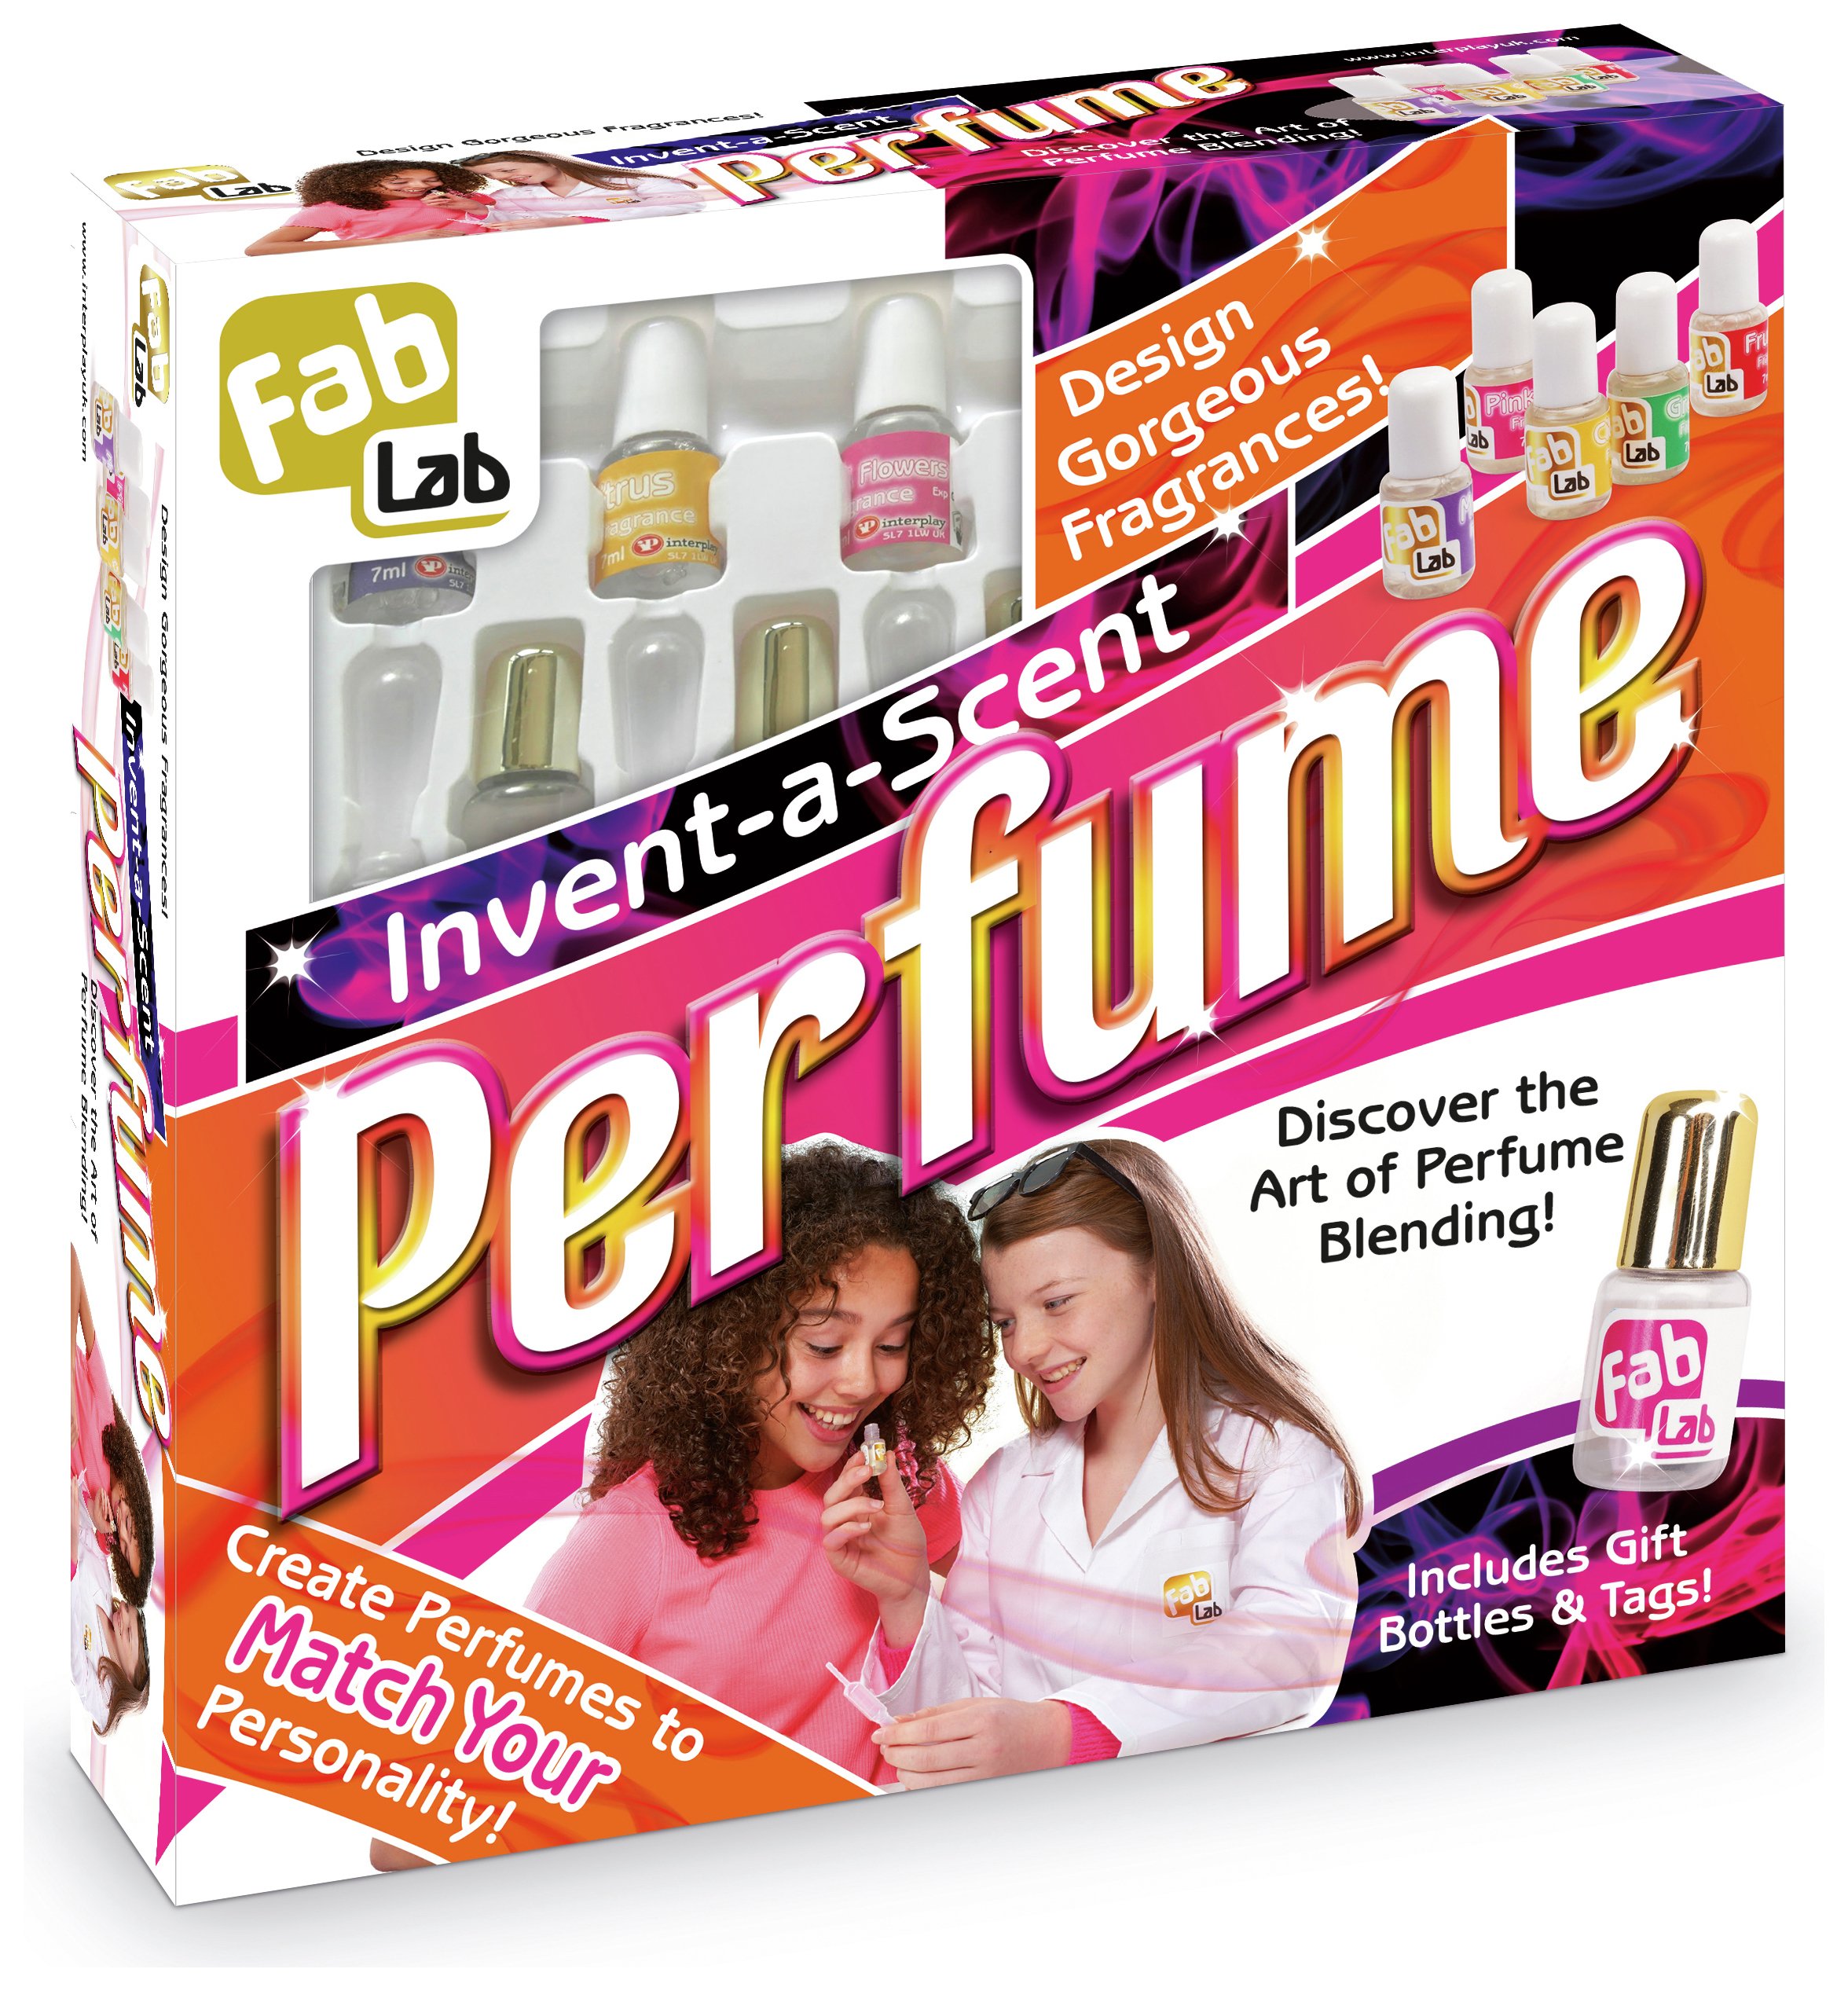 FabLab Invent-a-Scent Perfume Kit